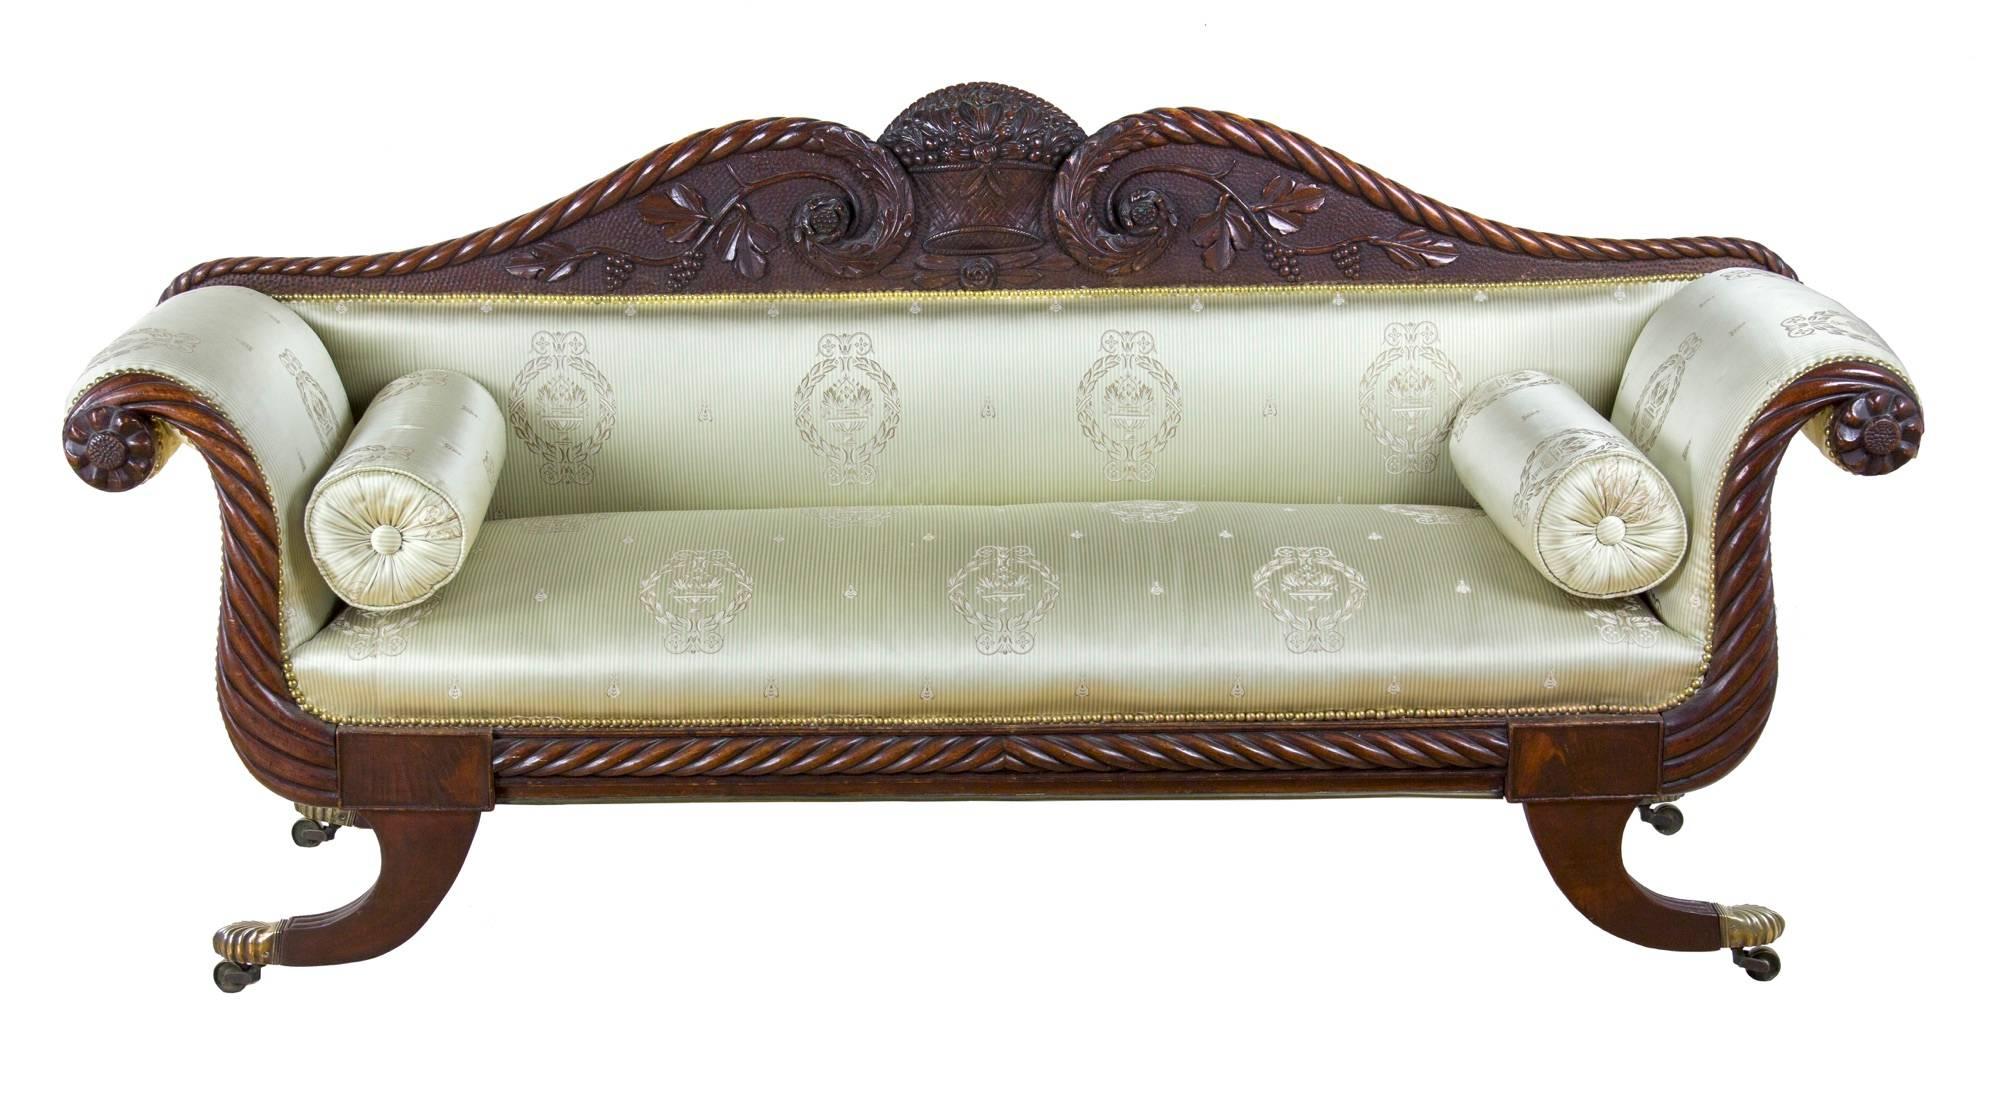 This sofa form occurs at the end of the Classical period, the work of Samuel Field McIntire, the son of the famous woodcarver Samuel McIntire, woodcarver and architect in Salem. The McIntire’s span three generations of celebrated woodcarving, and